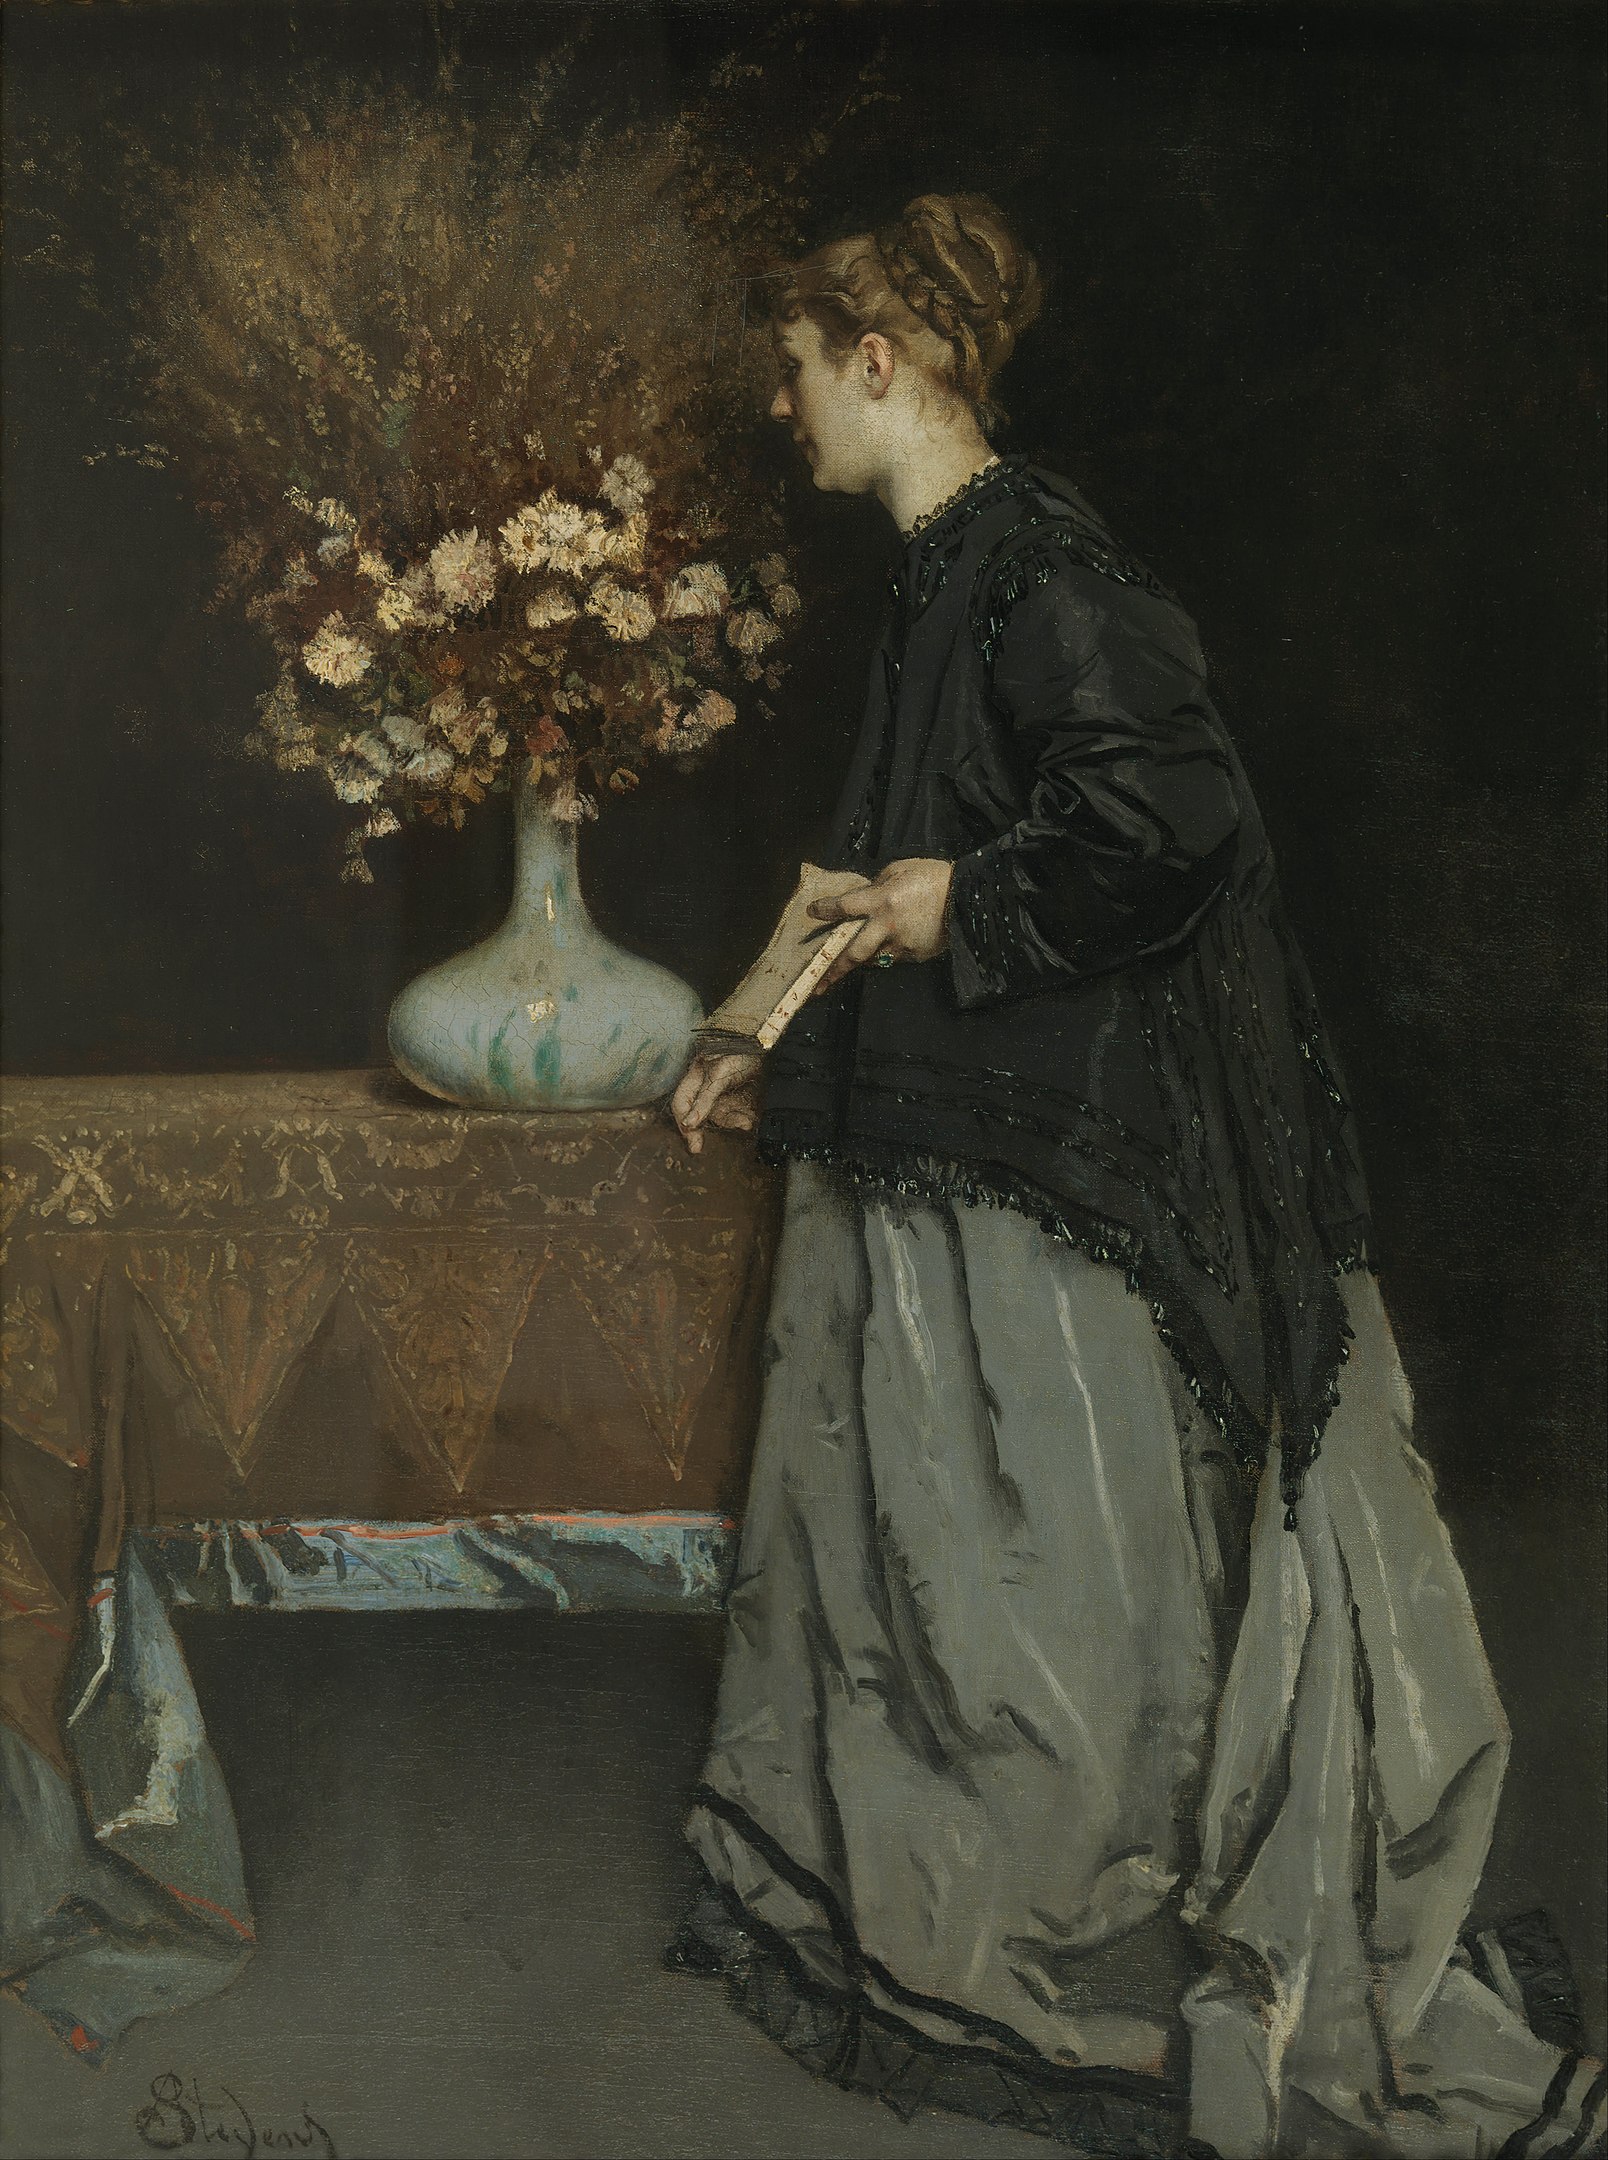 A woman carrying a book observing a vase of flowers on a table